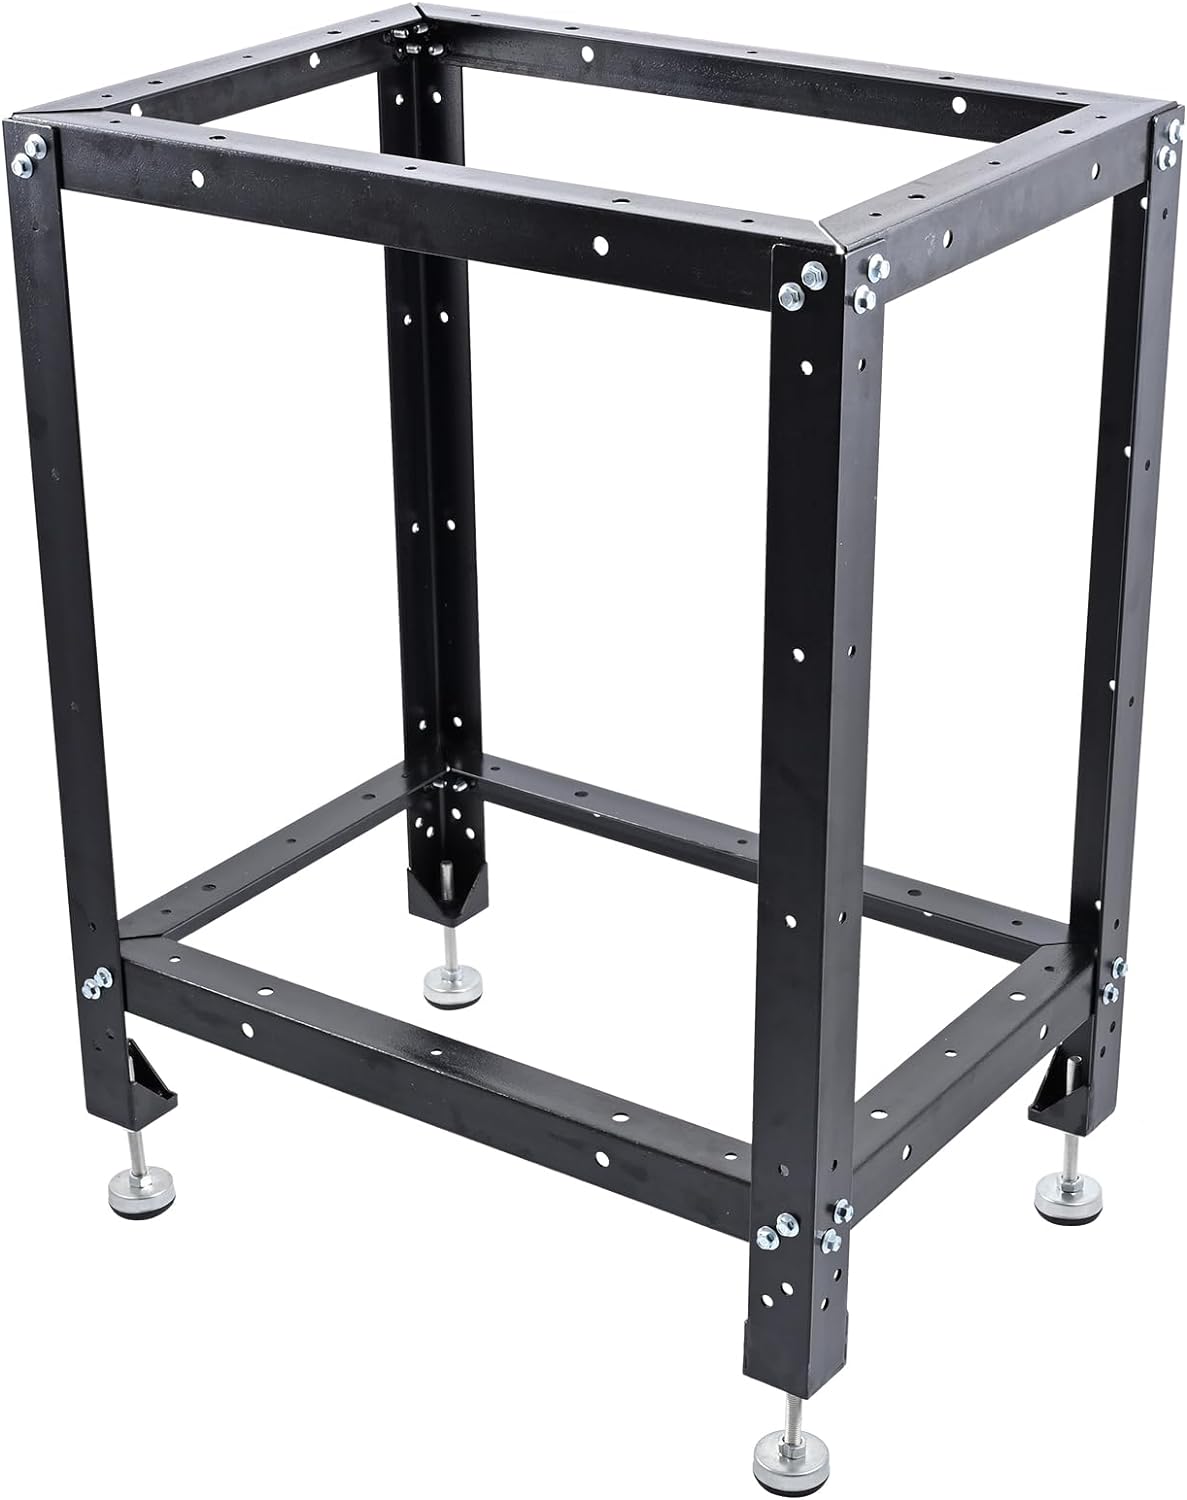 Gazzyt Utility Work Stand Alloy Steel Multi-Purpose Shop Stand with Adjustable Legs for Accessory Workbenches for Shop